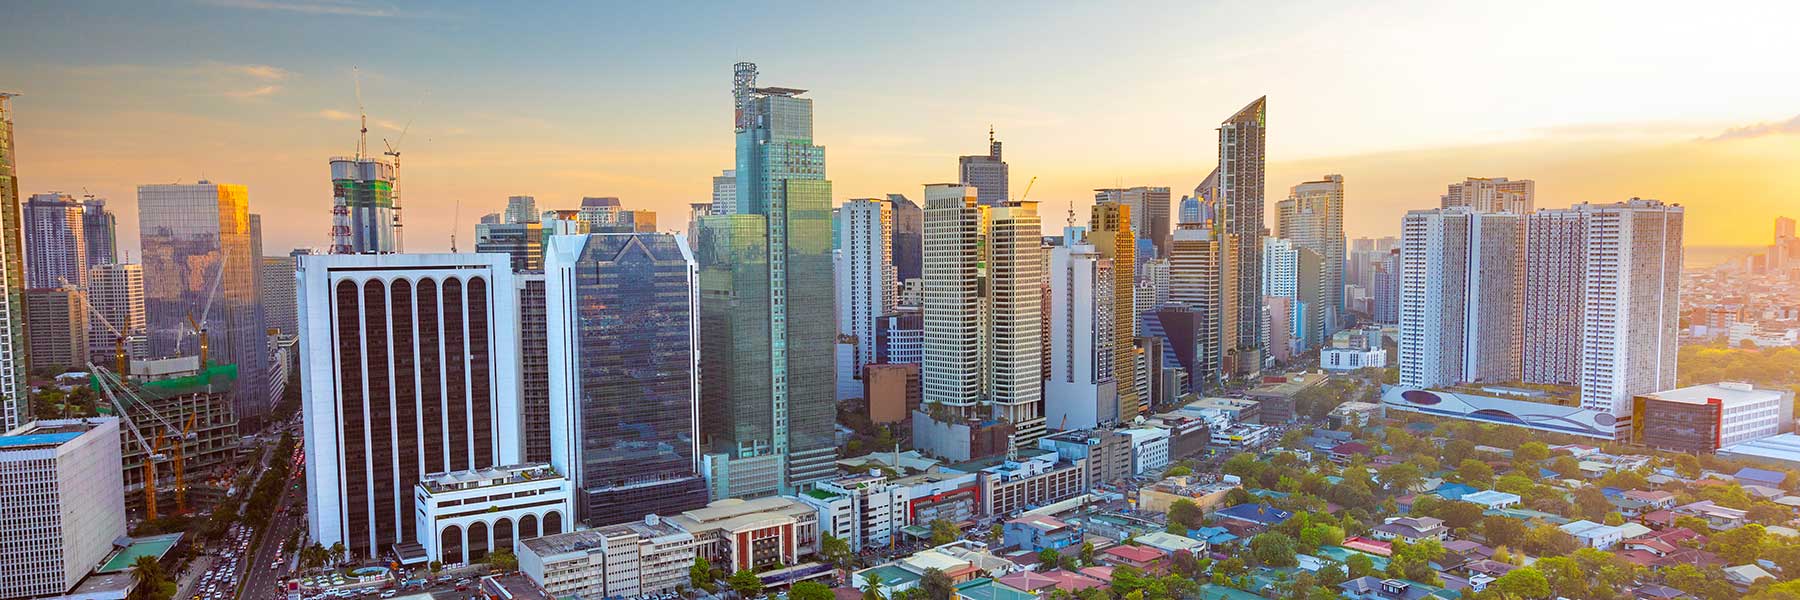 View of Makati city skyline at sunset in the Philippines